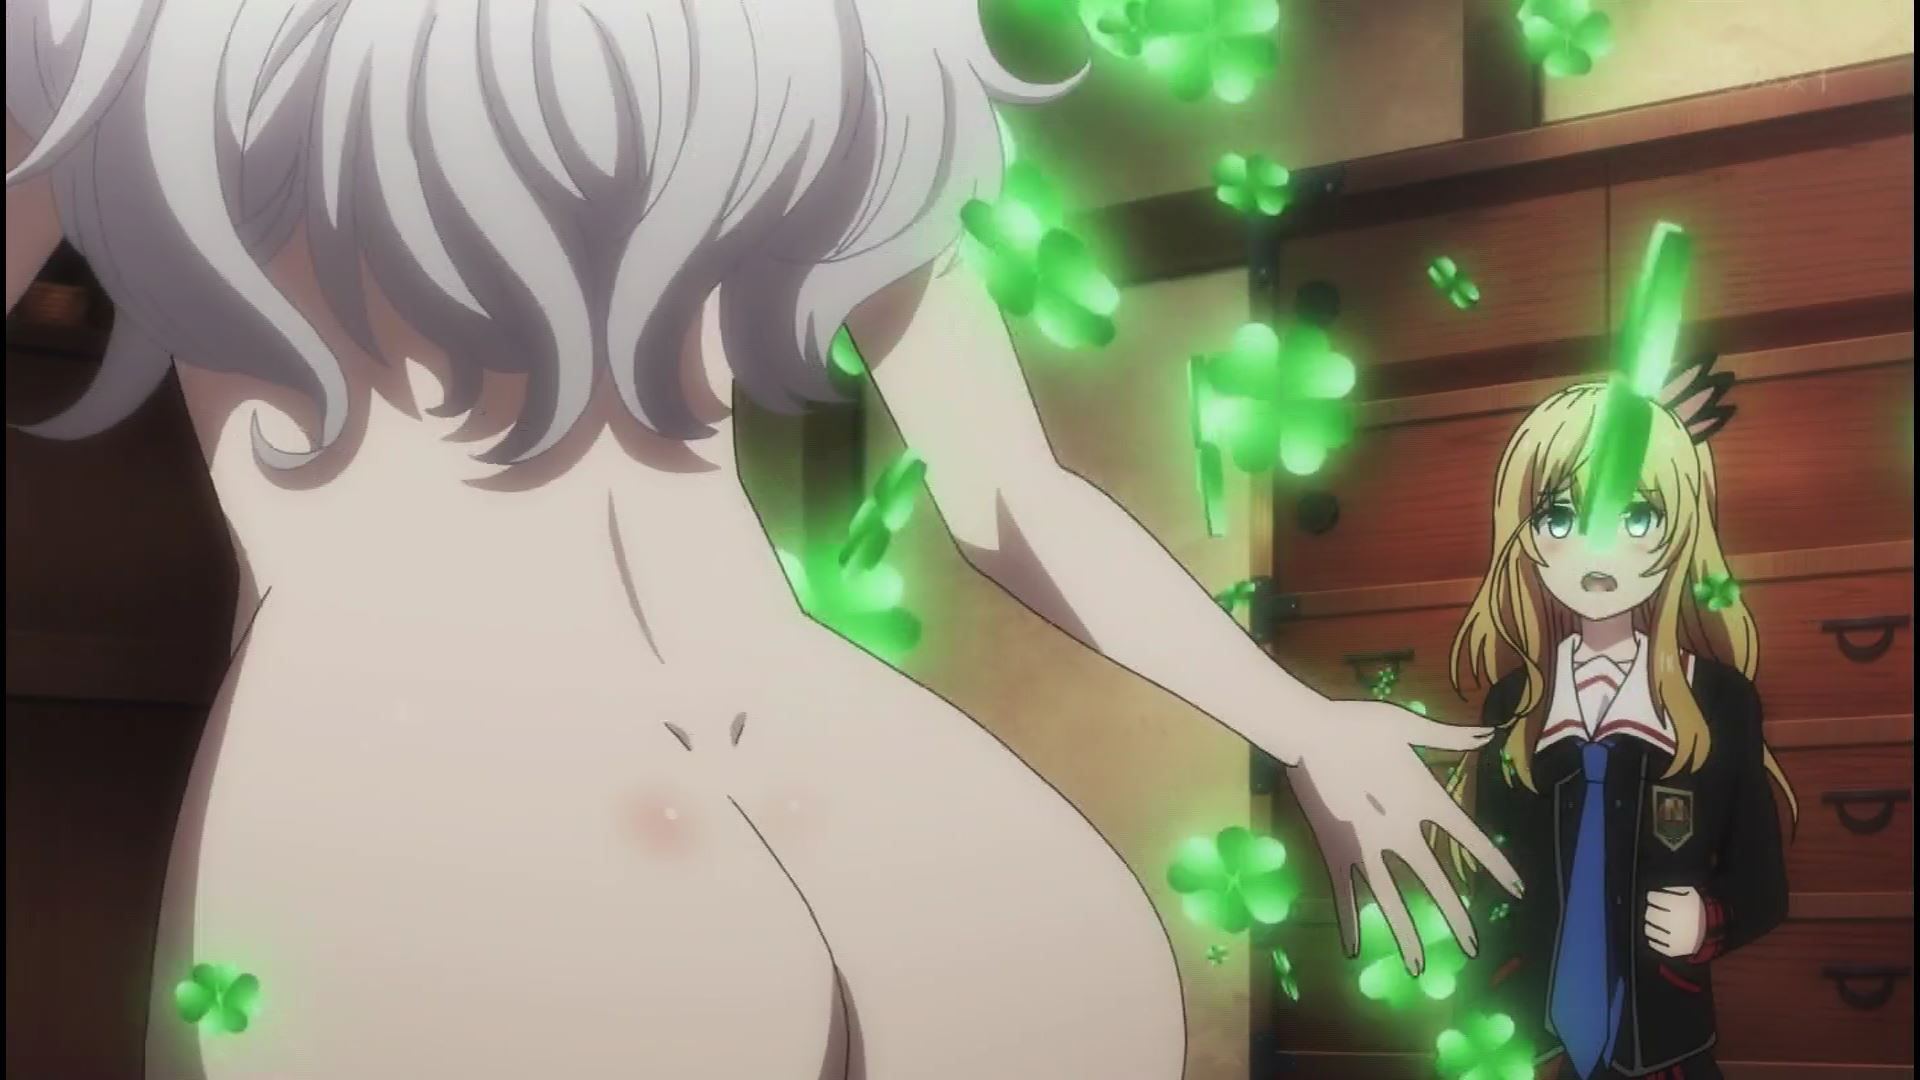 Anime [War x Love (Vallav)] In 11 episodes and become naked with girls and deep kiss or erotic scene! 19